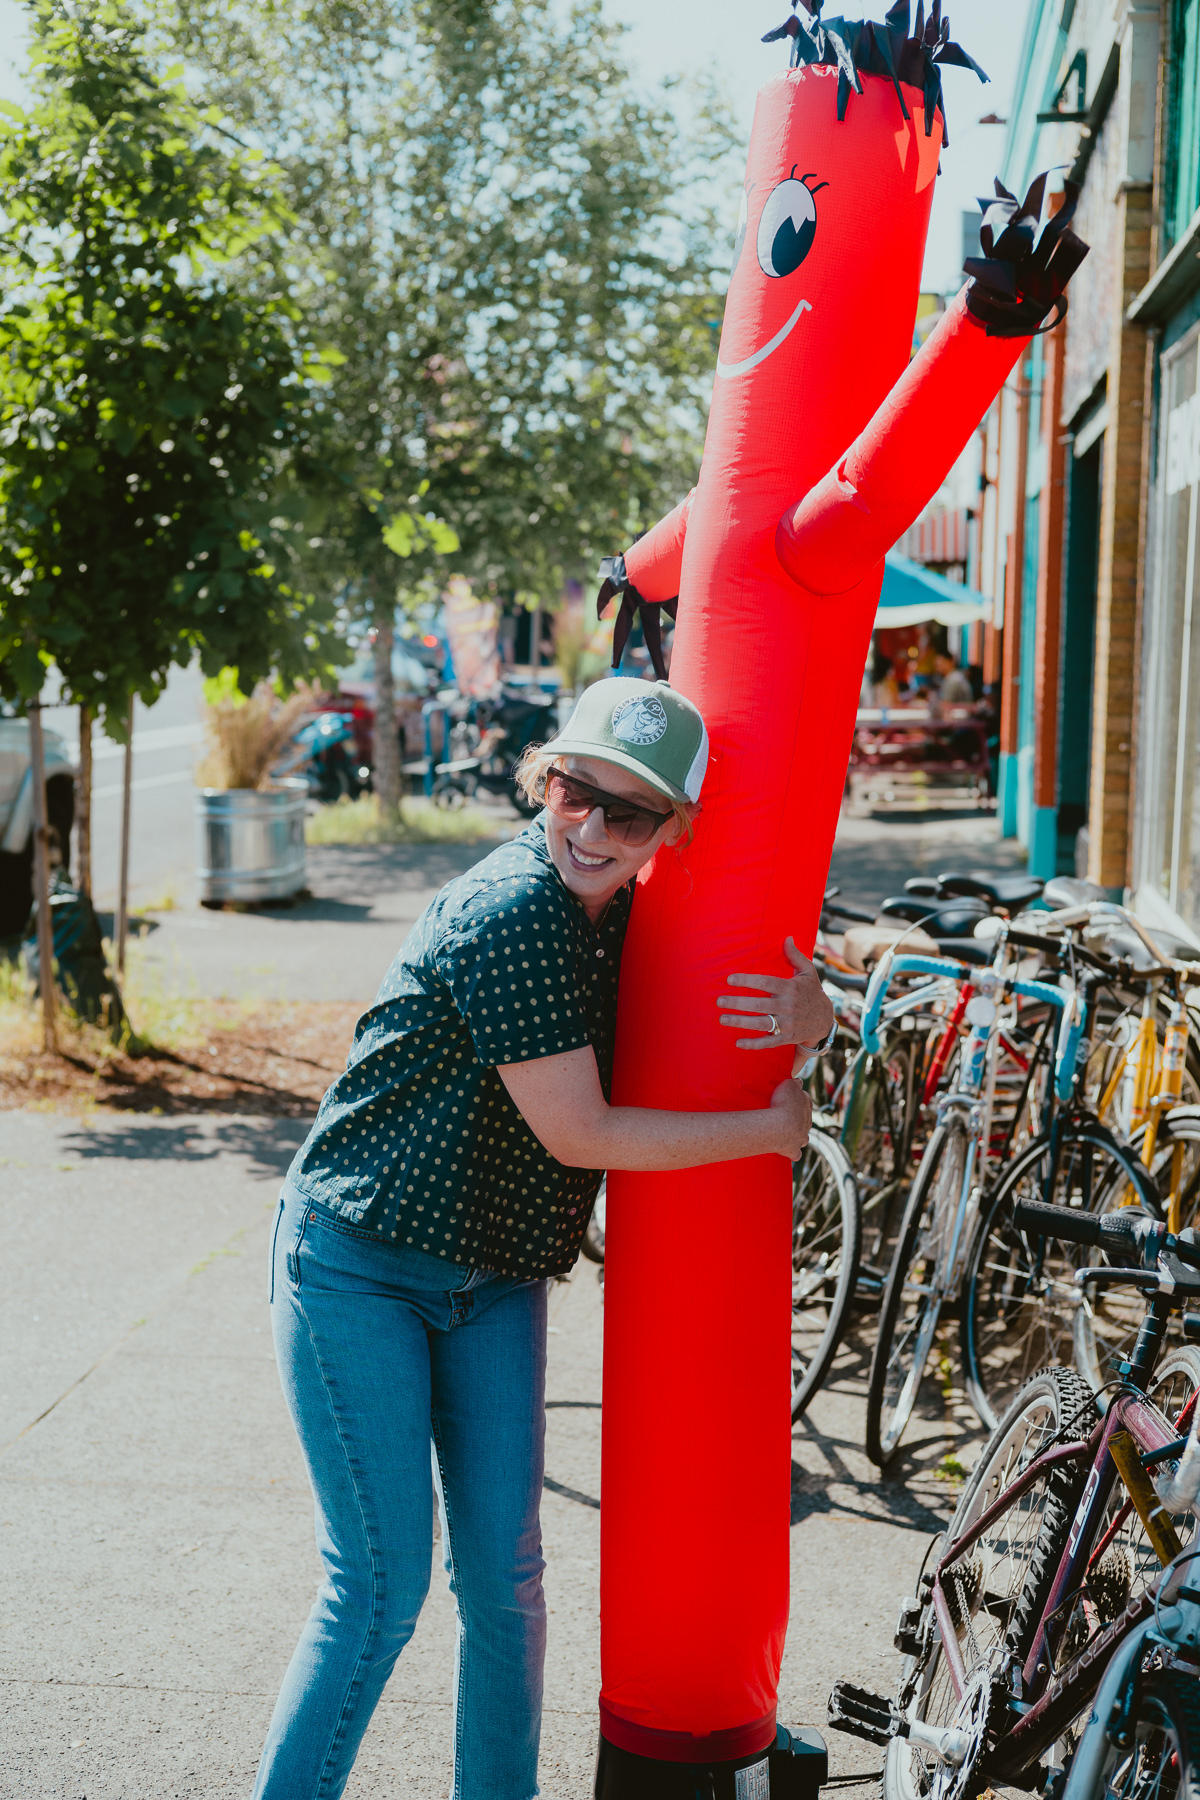 A laughing woman hugs an inflatable tube man on a sidewalk.